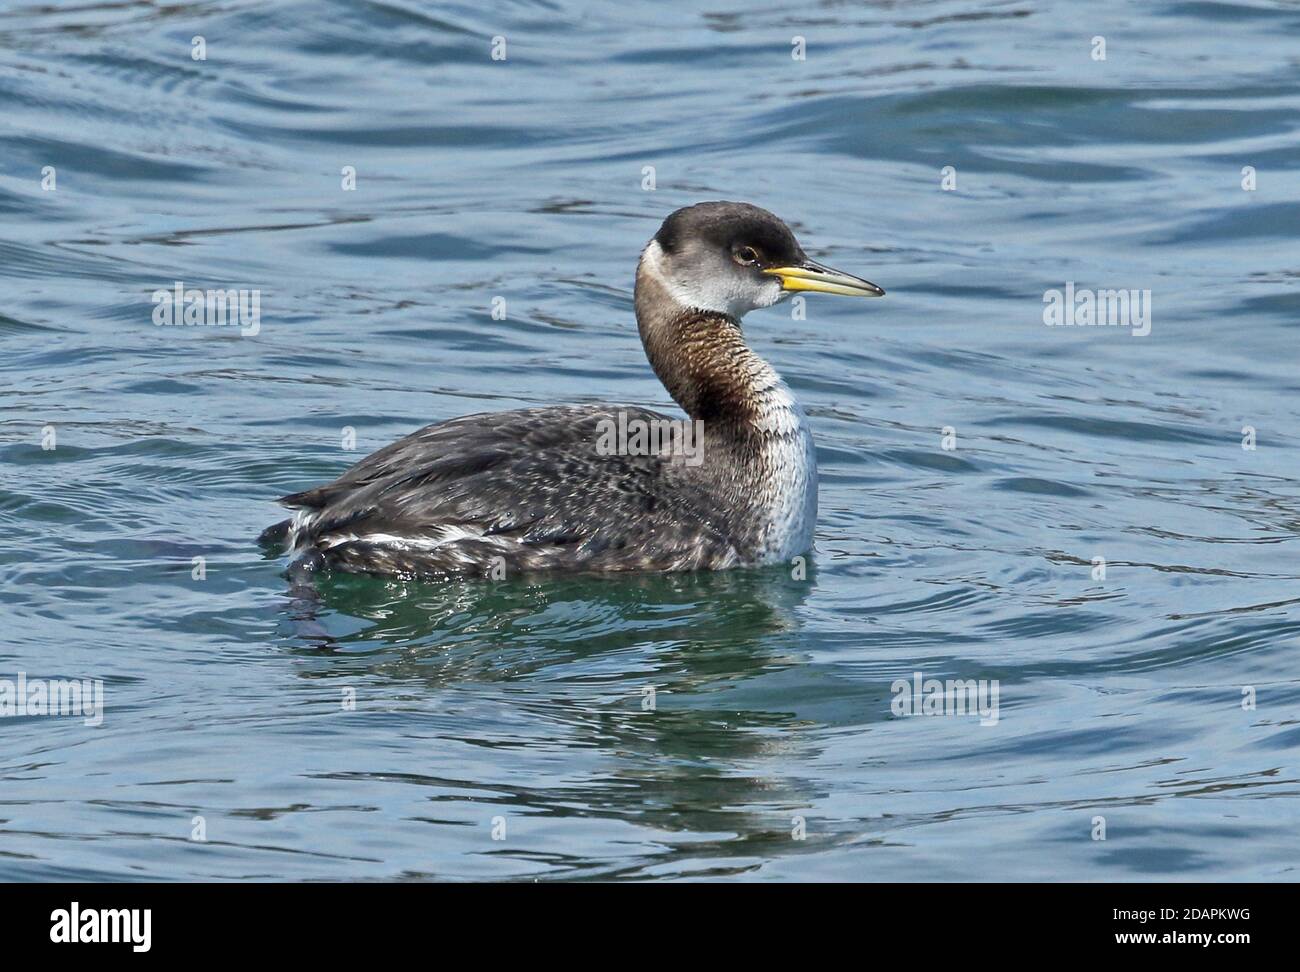 Red-necked Grebe (Podiceps grisegena holbollii) winter plumage adult swimming in harbour  Choshi, Chiba Prefecture, Japan        February Stock Photo